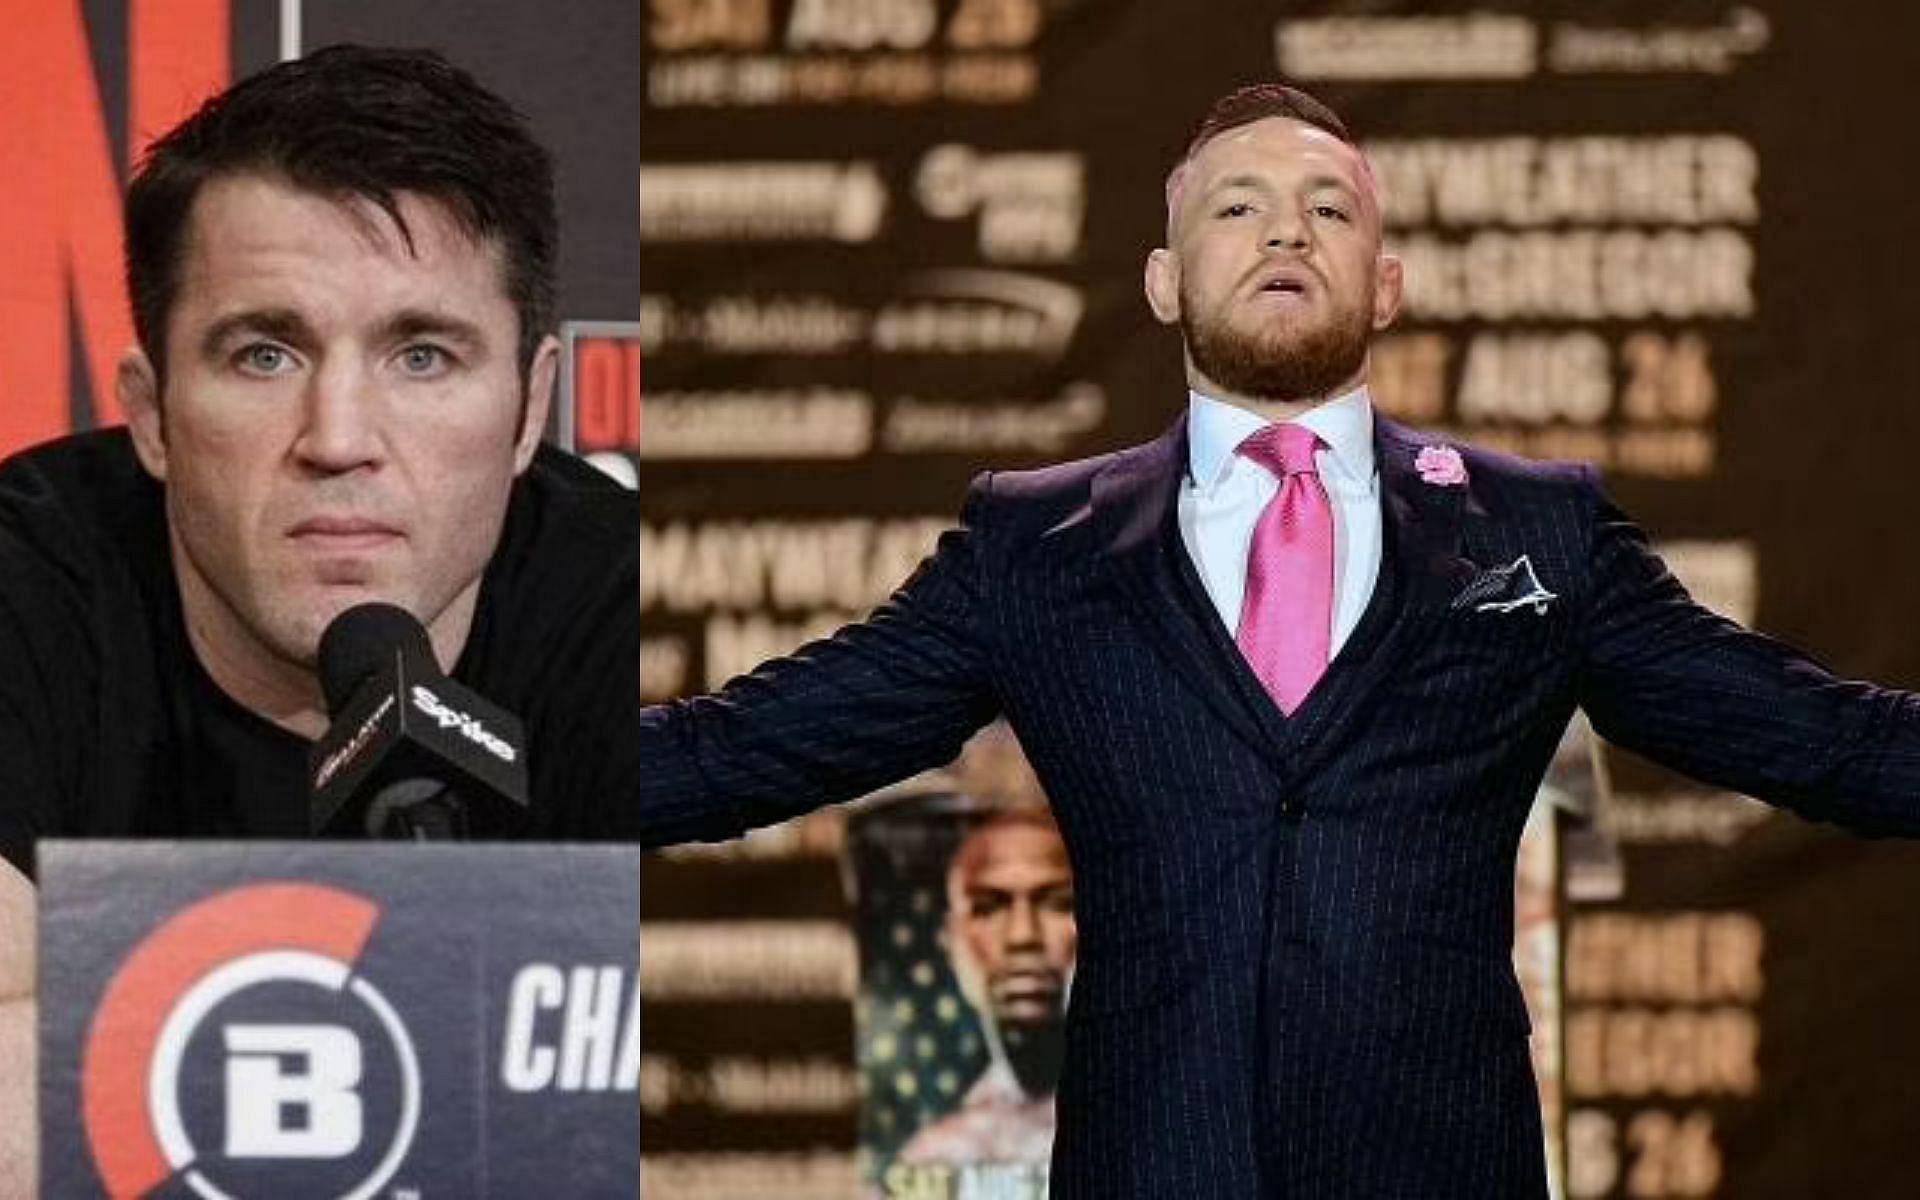 Chael Sonnen (left) and Conor McGregor (right)